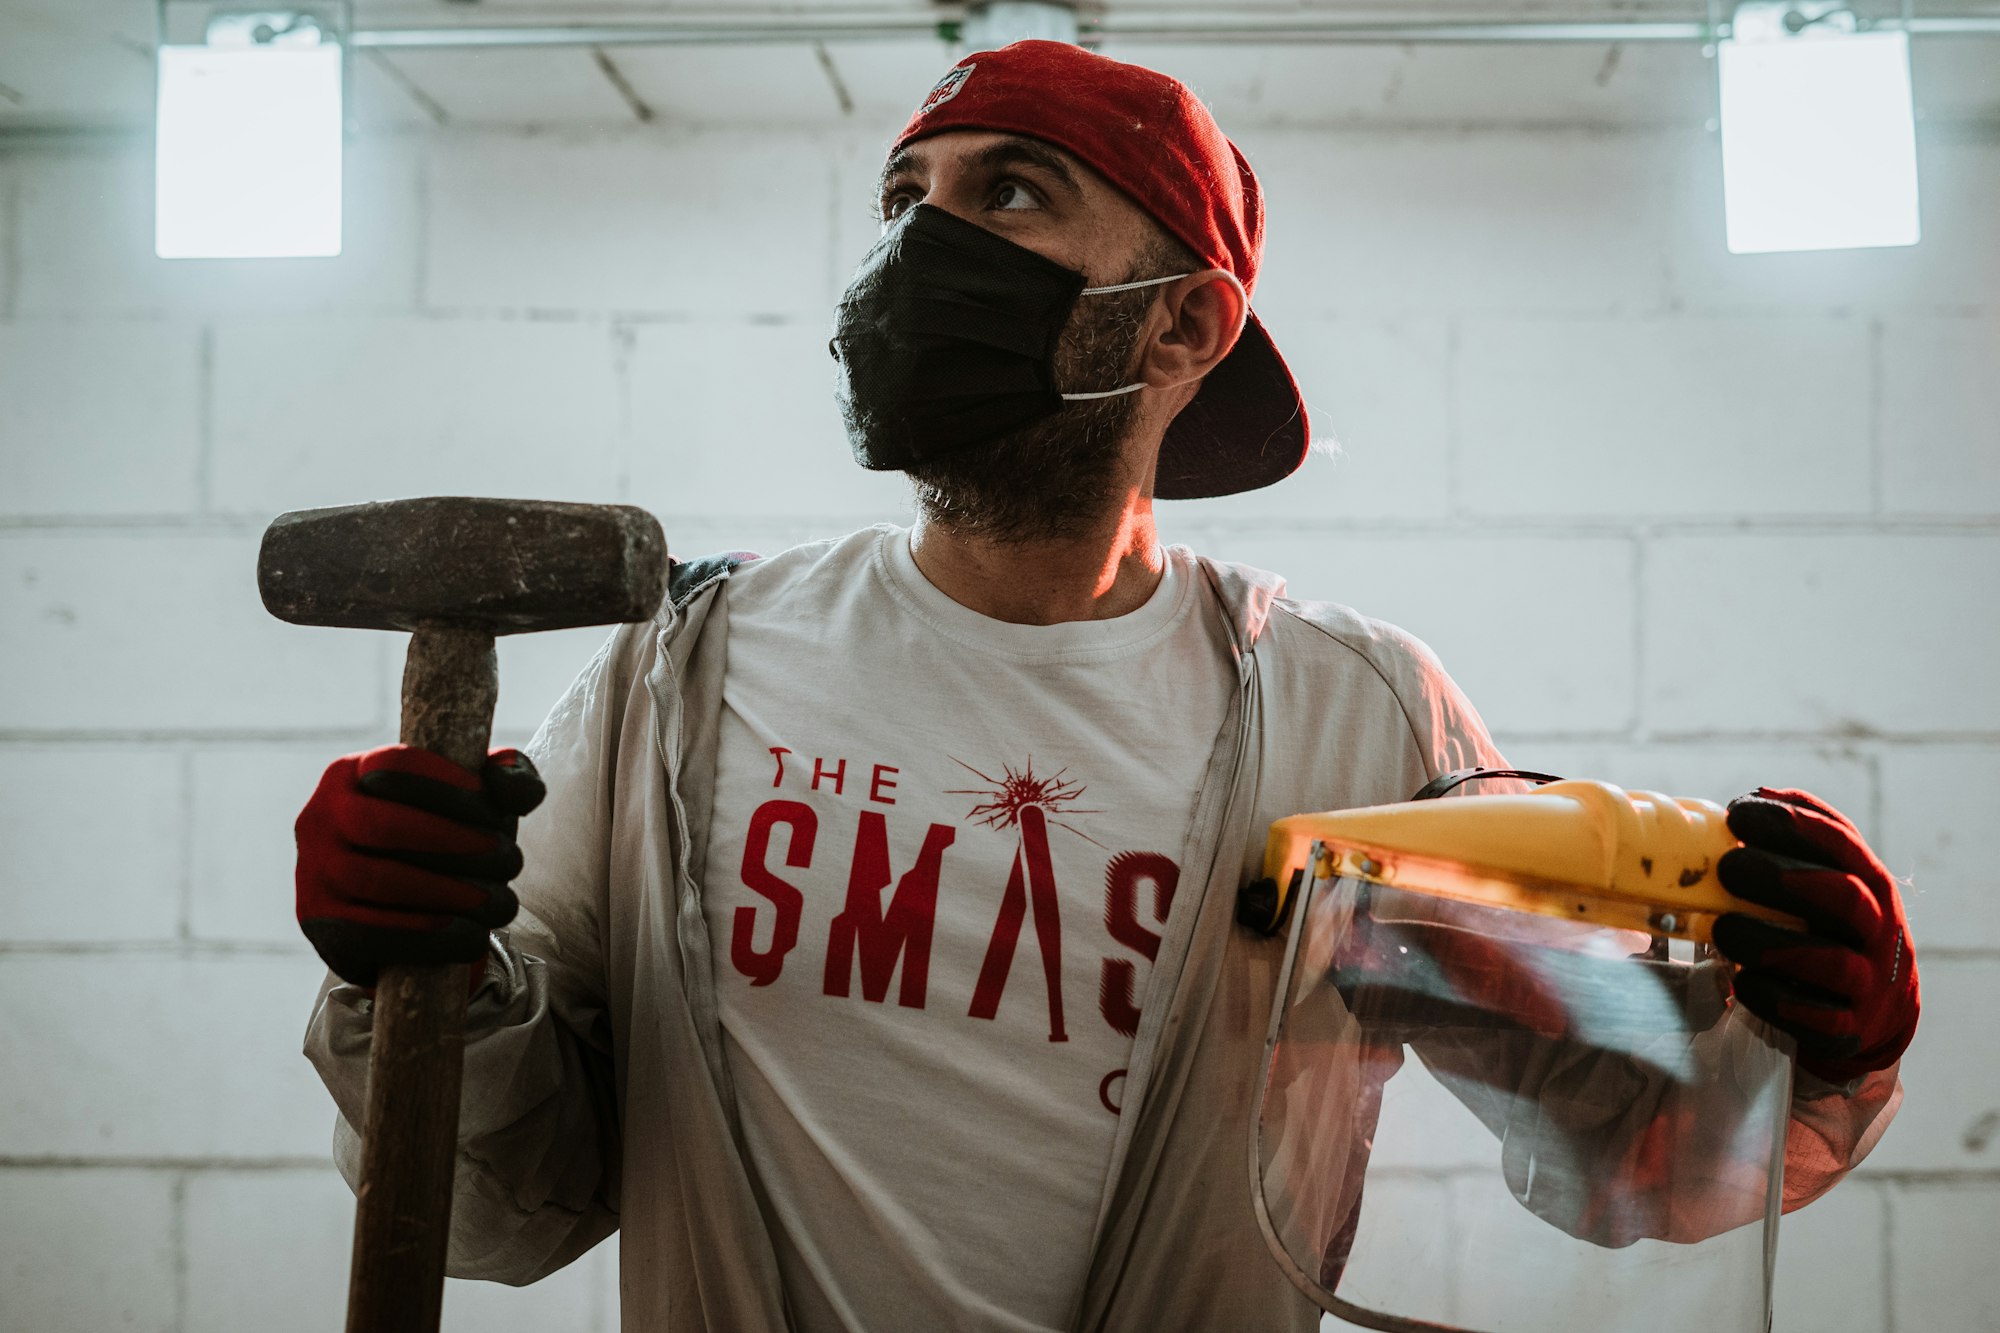 Man holding a sledge hammer and face mask - wornbee.com